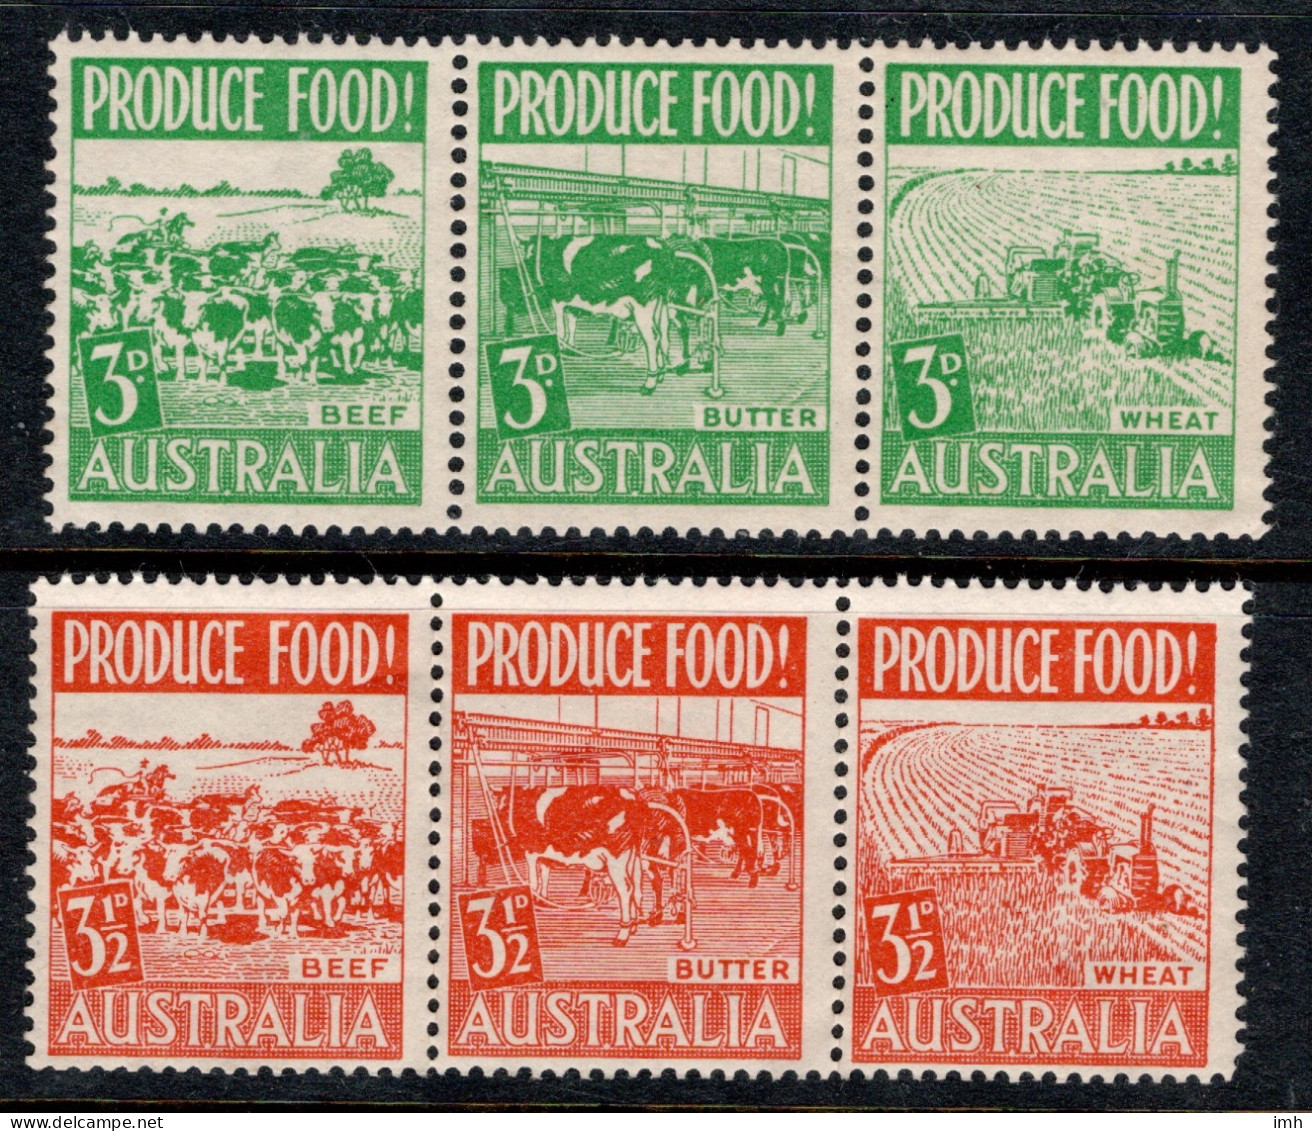 1953 Australia SG 255-260 Produce Food In Strips Of Three Complete Set , Mint Unhinged MUH Cat £3.00 - Nuovi